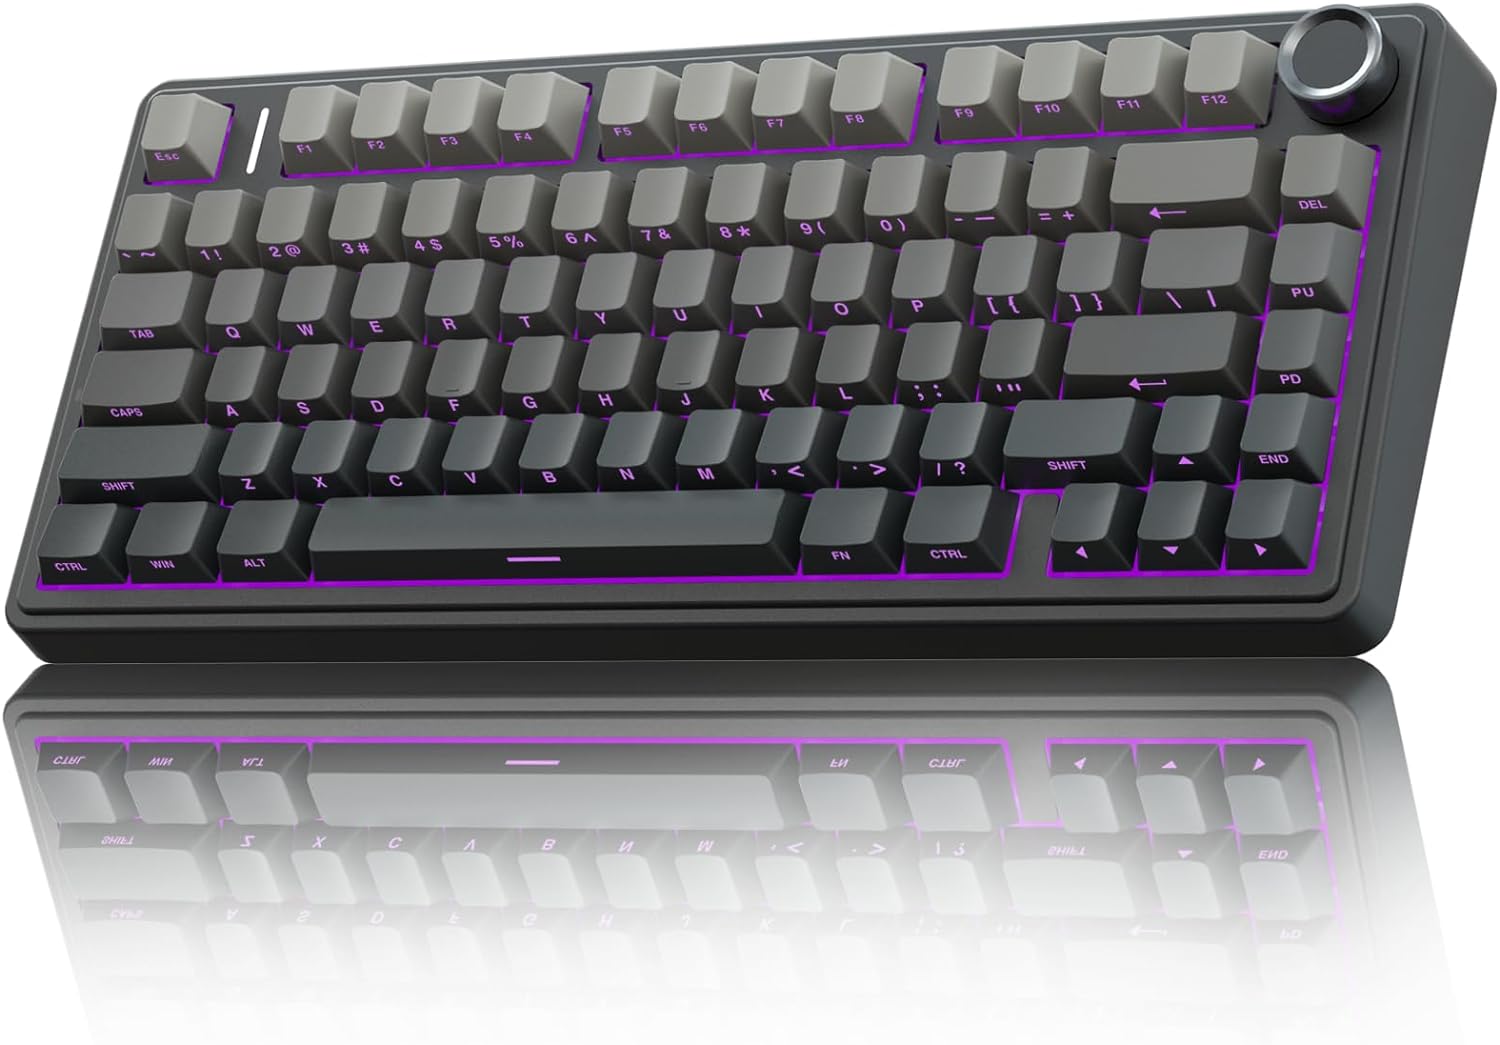 AULA F75 Wireless Mechanical Keyboard,75% Gasket Hot Swappable Custom Keyboard,RGB Backlit,Pre-lubed Reaper Switches,Side Printed PBT Keycaps,2.4GHz/USB-C/Bluetooth Mechancial Gaming Keyboard